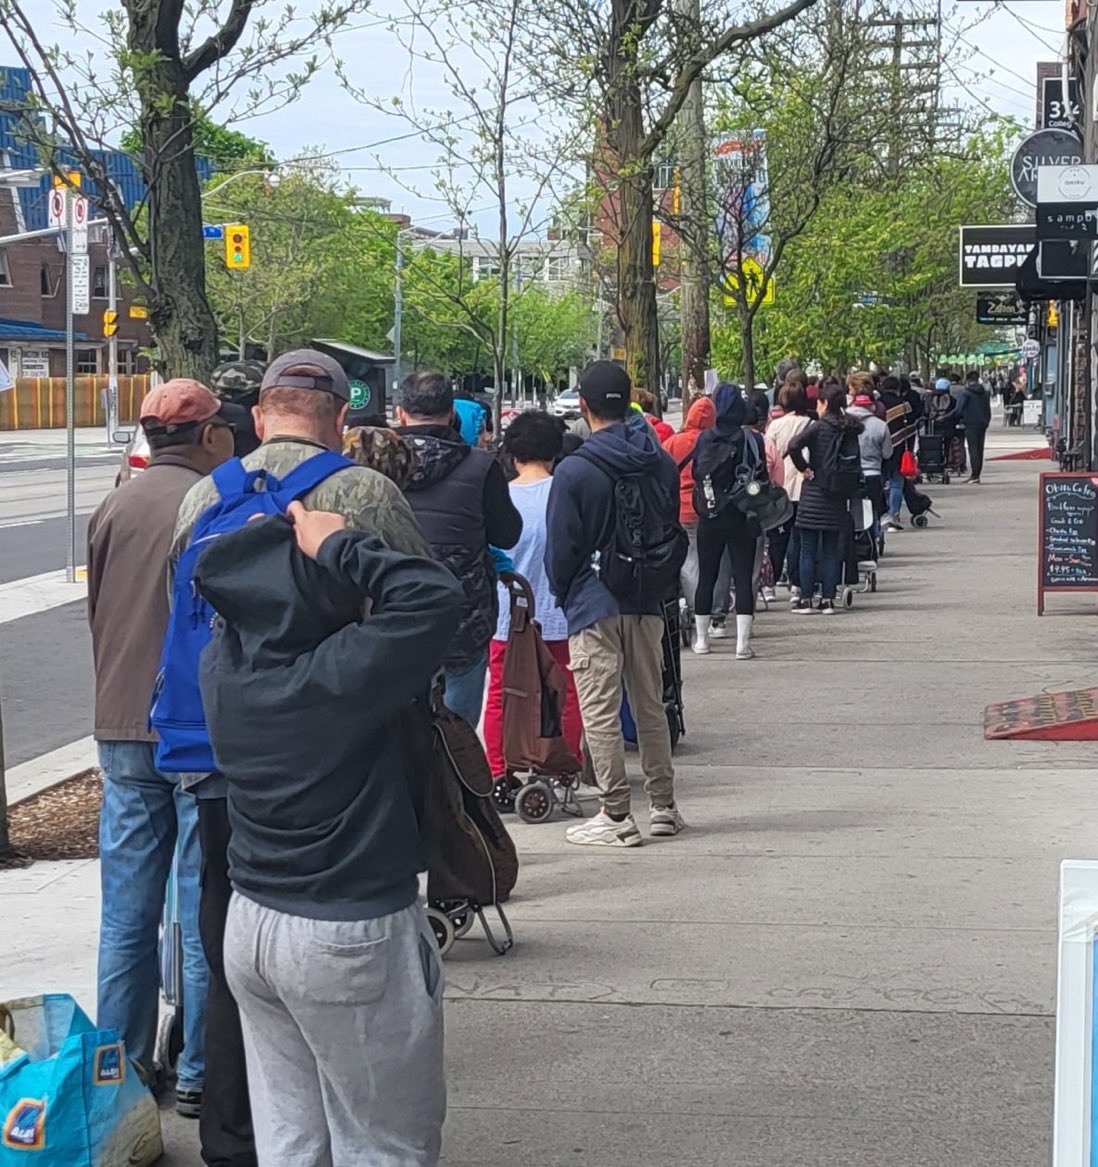 SAD 😔 Lineup at the Fort York Food Bank this morning. Imagine, this is Chrystia Freeland's riding too 🇨🇦

📸 @Domenic_Toronto